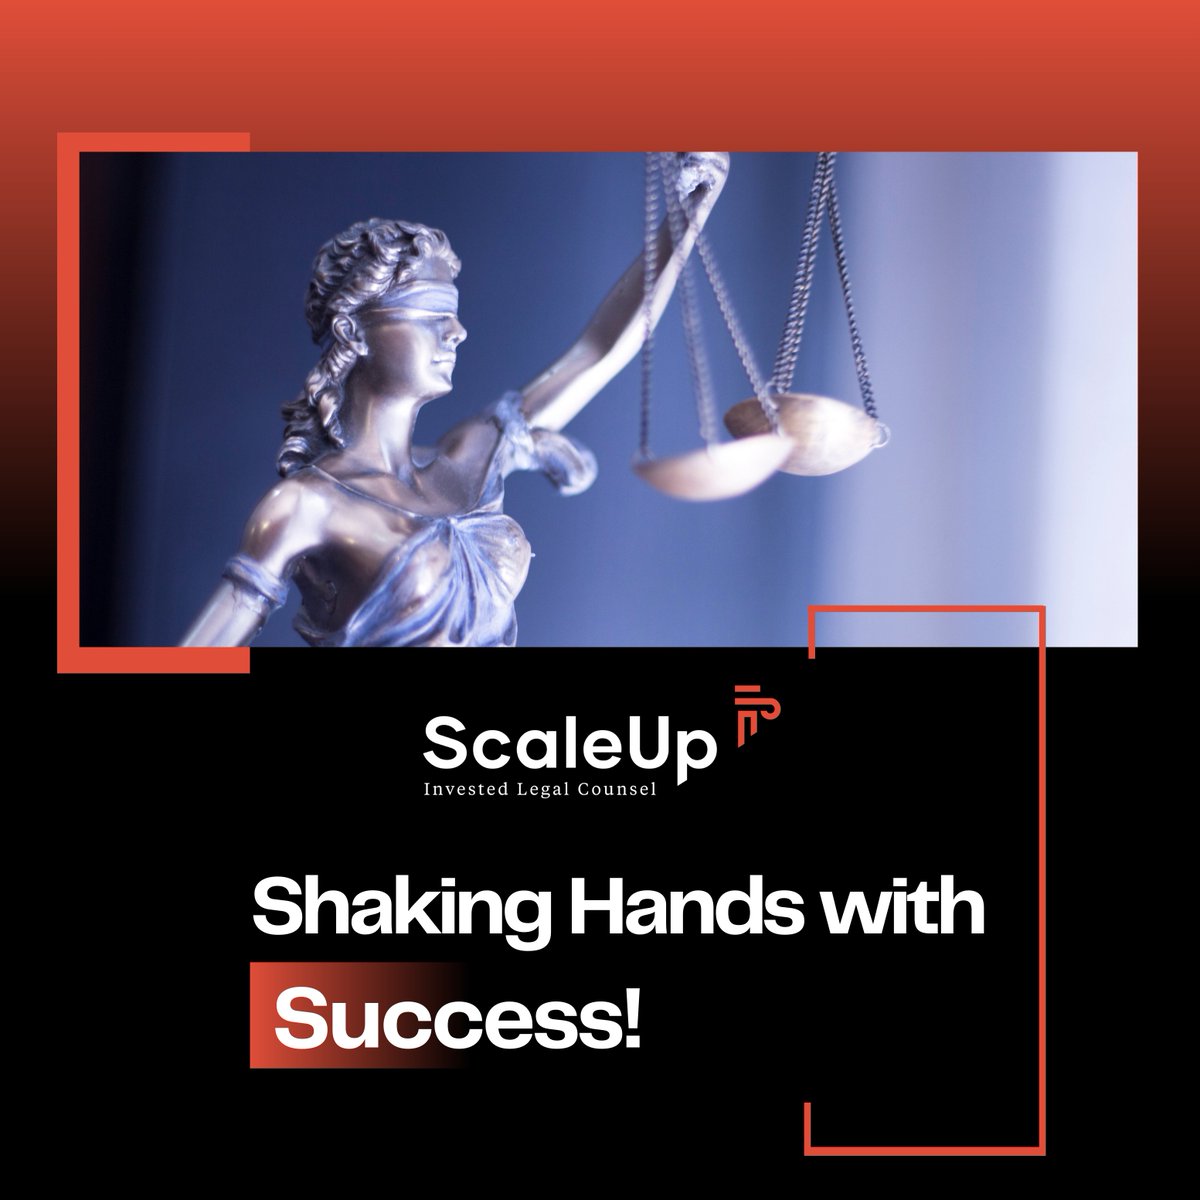 At ScaleUp Legal, we believe in strong handshakes and even stronger partnerships. Let's shape your future together.

#LegalPartnership #StartupGrowth  #legalservices #startuplaw #founder #legaladvice